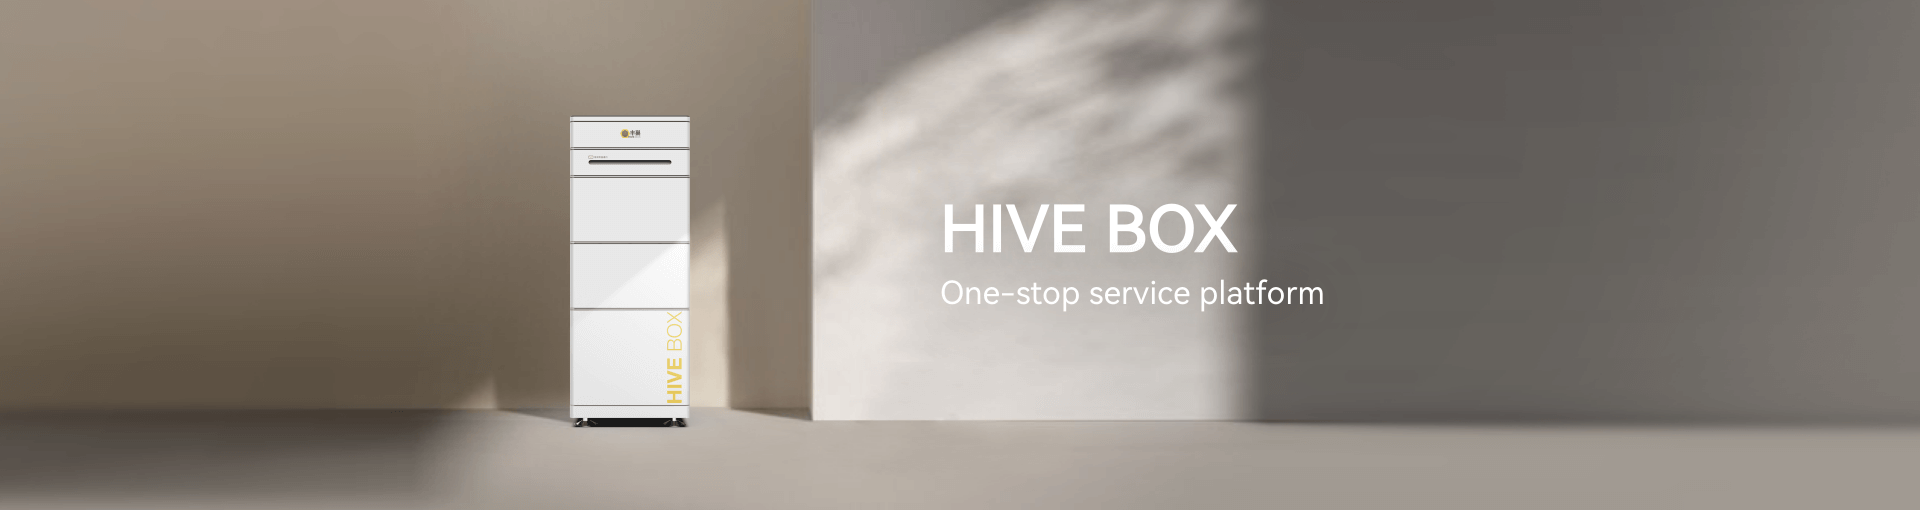 Hive Box, Connecting a one-stop service platform